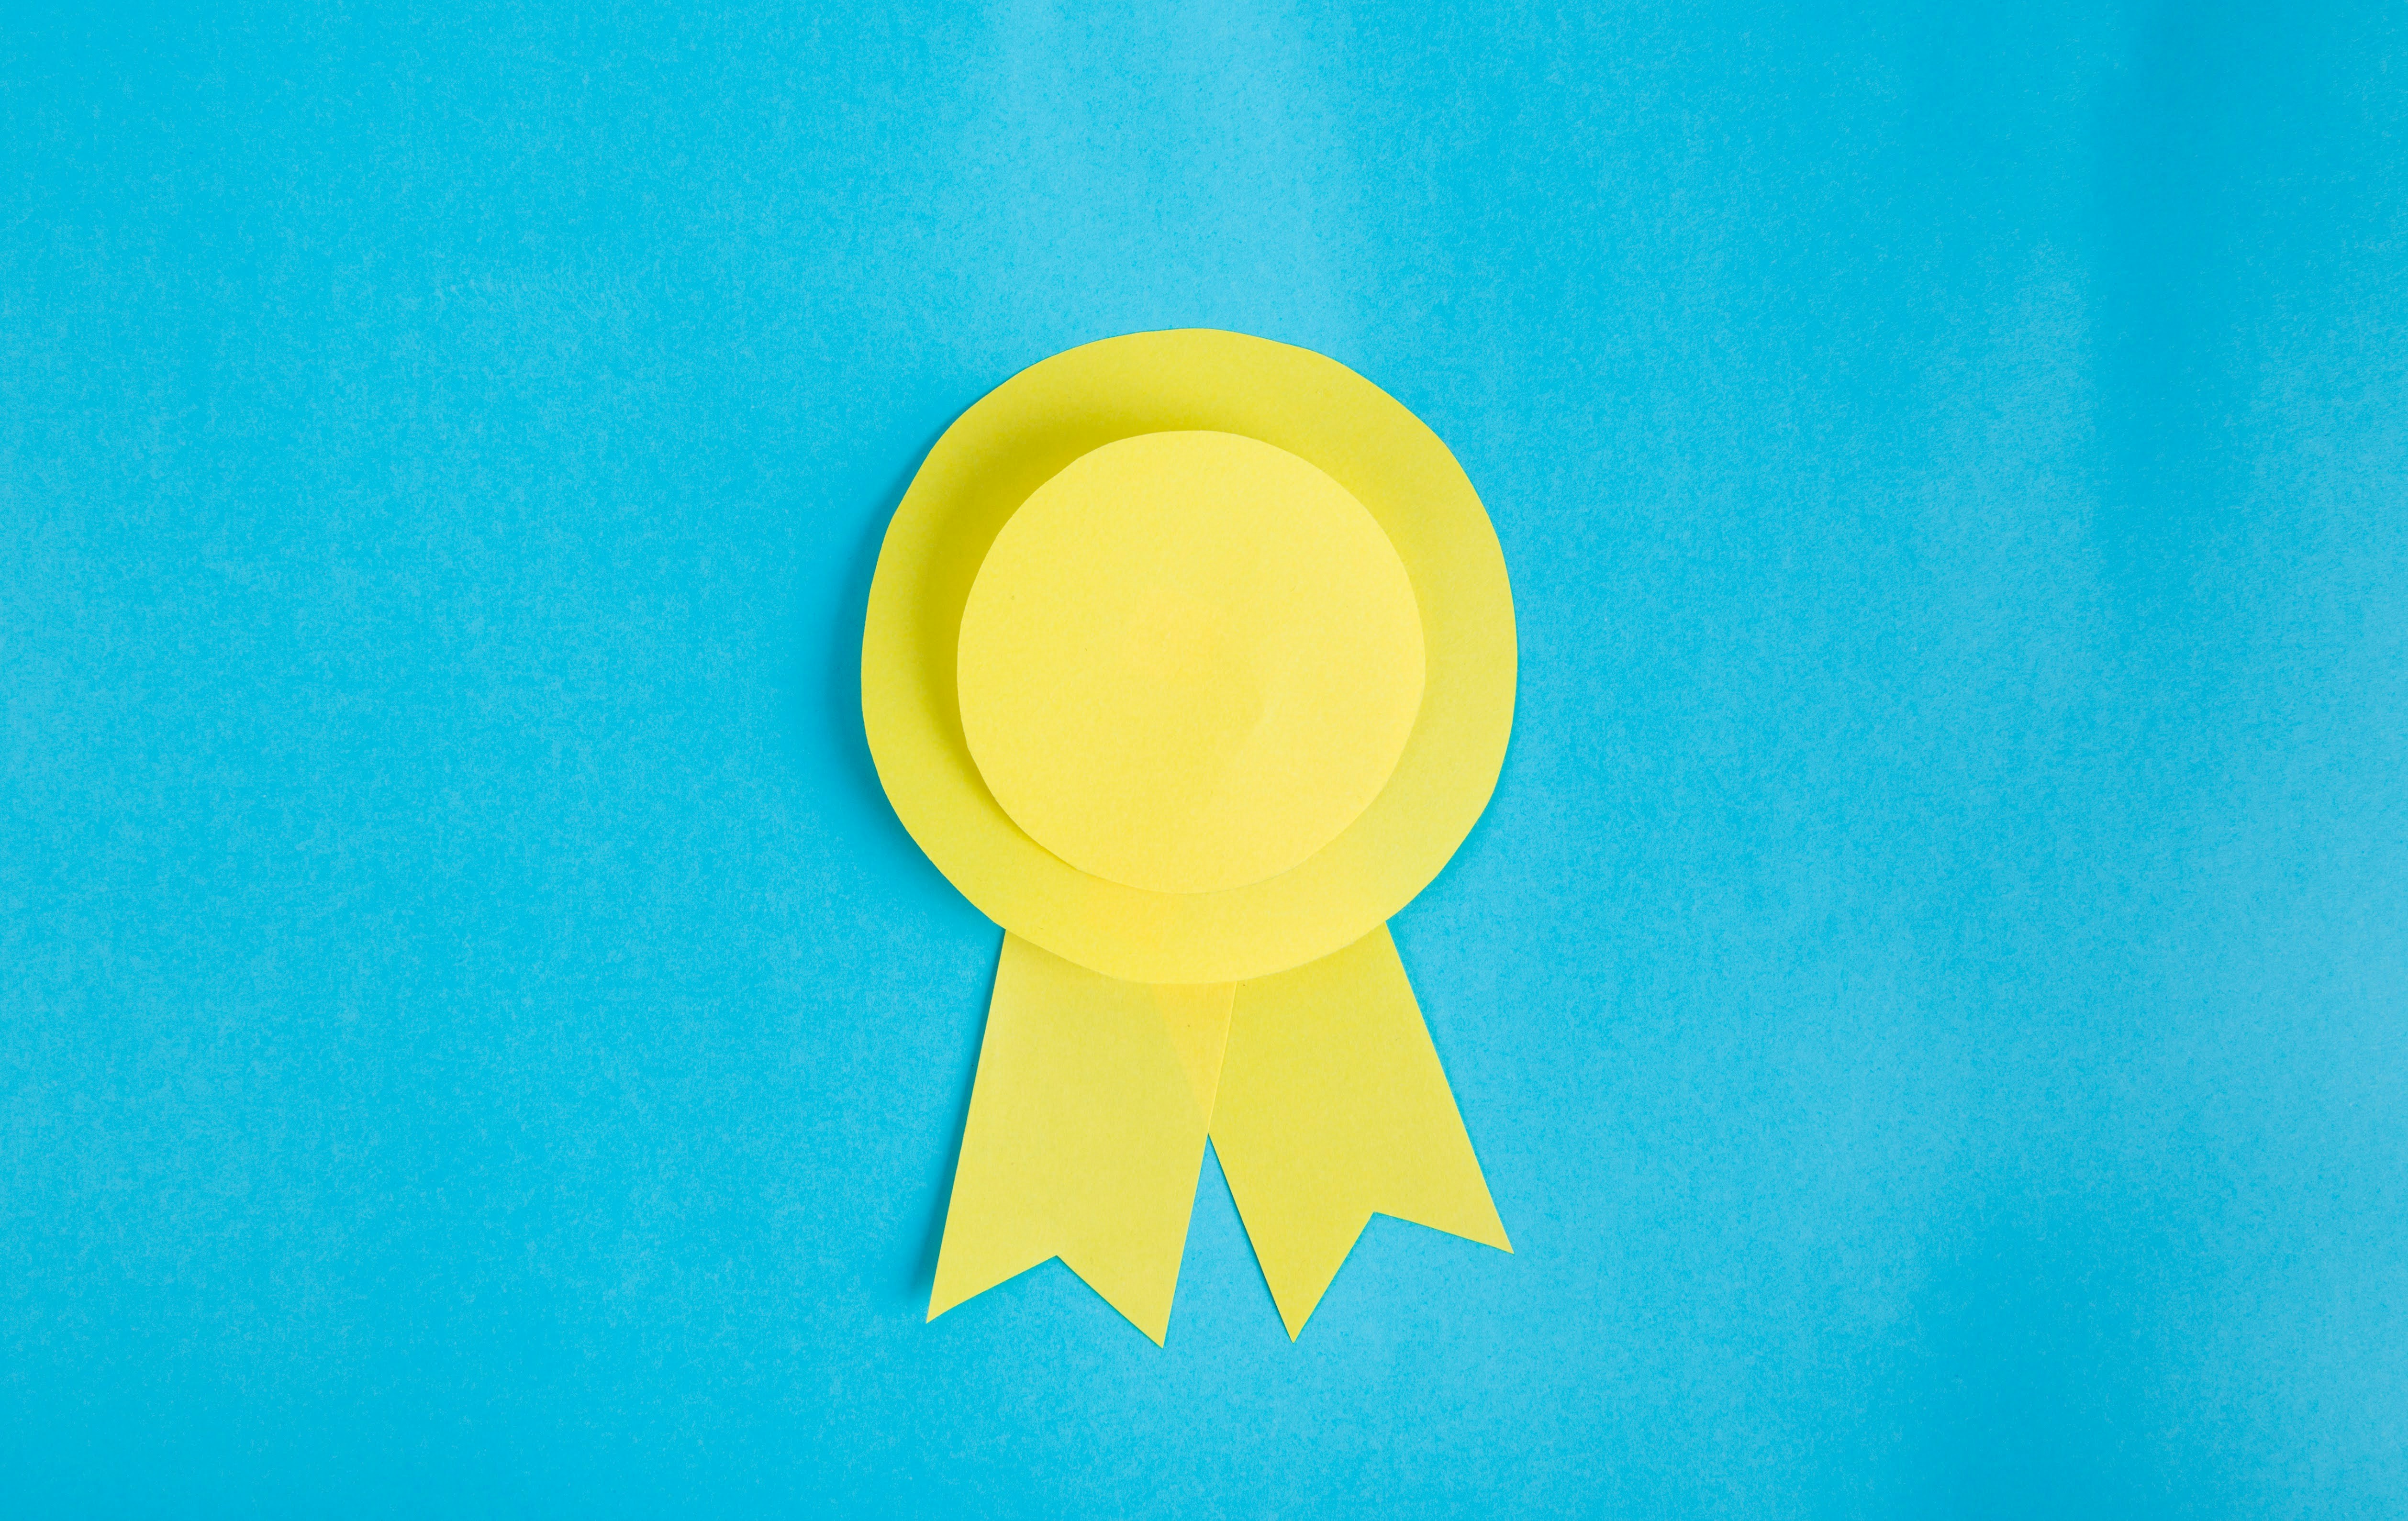 A yellow ribbon gracefully adorns a serene blue background, creating a harmonious contrast.